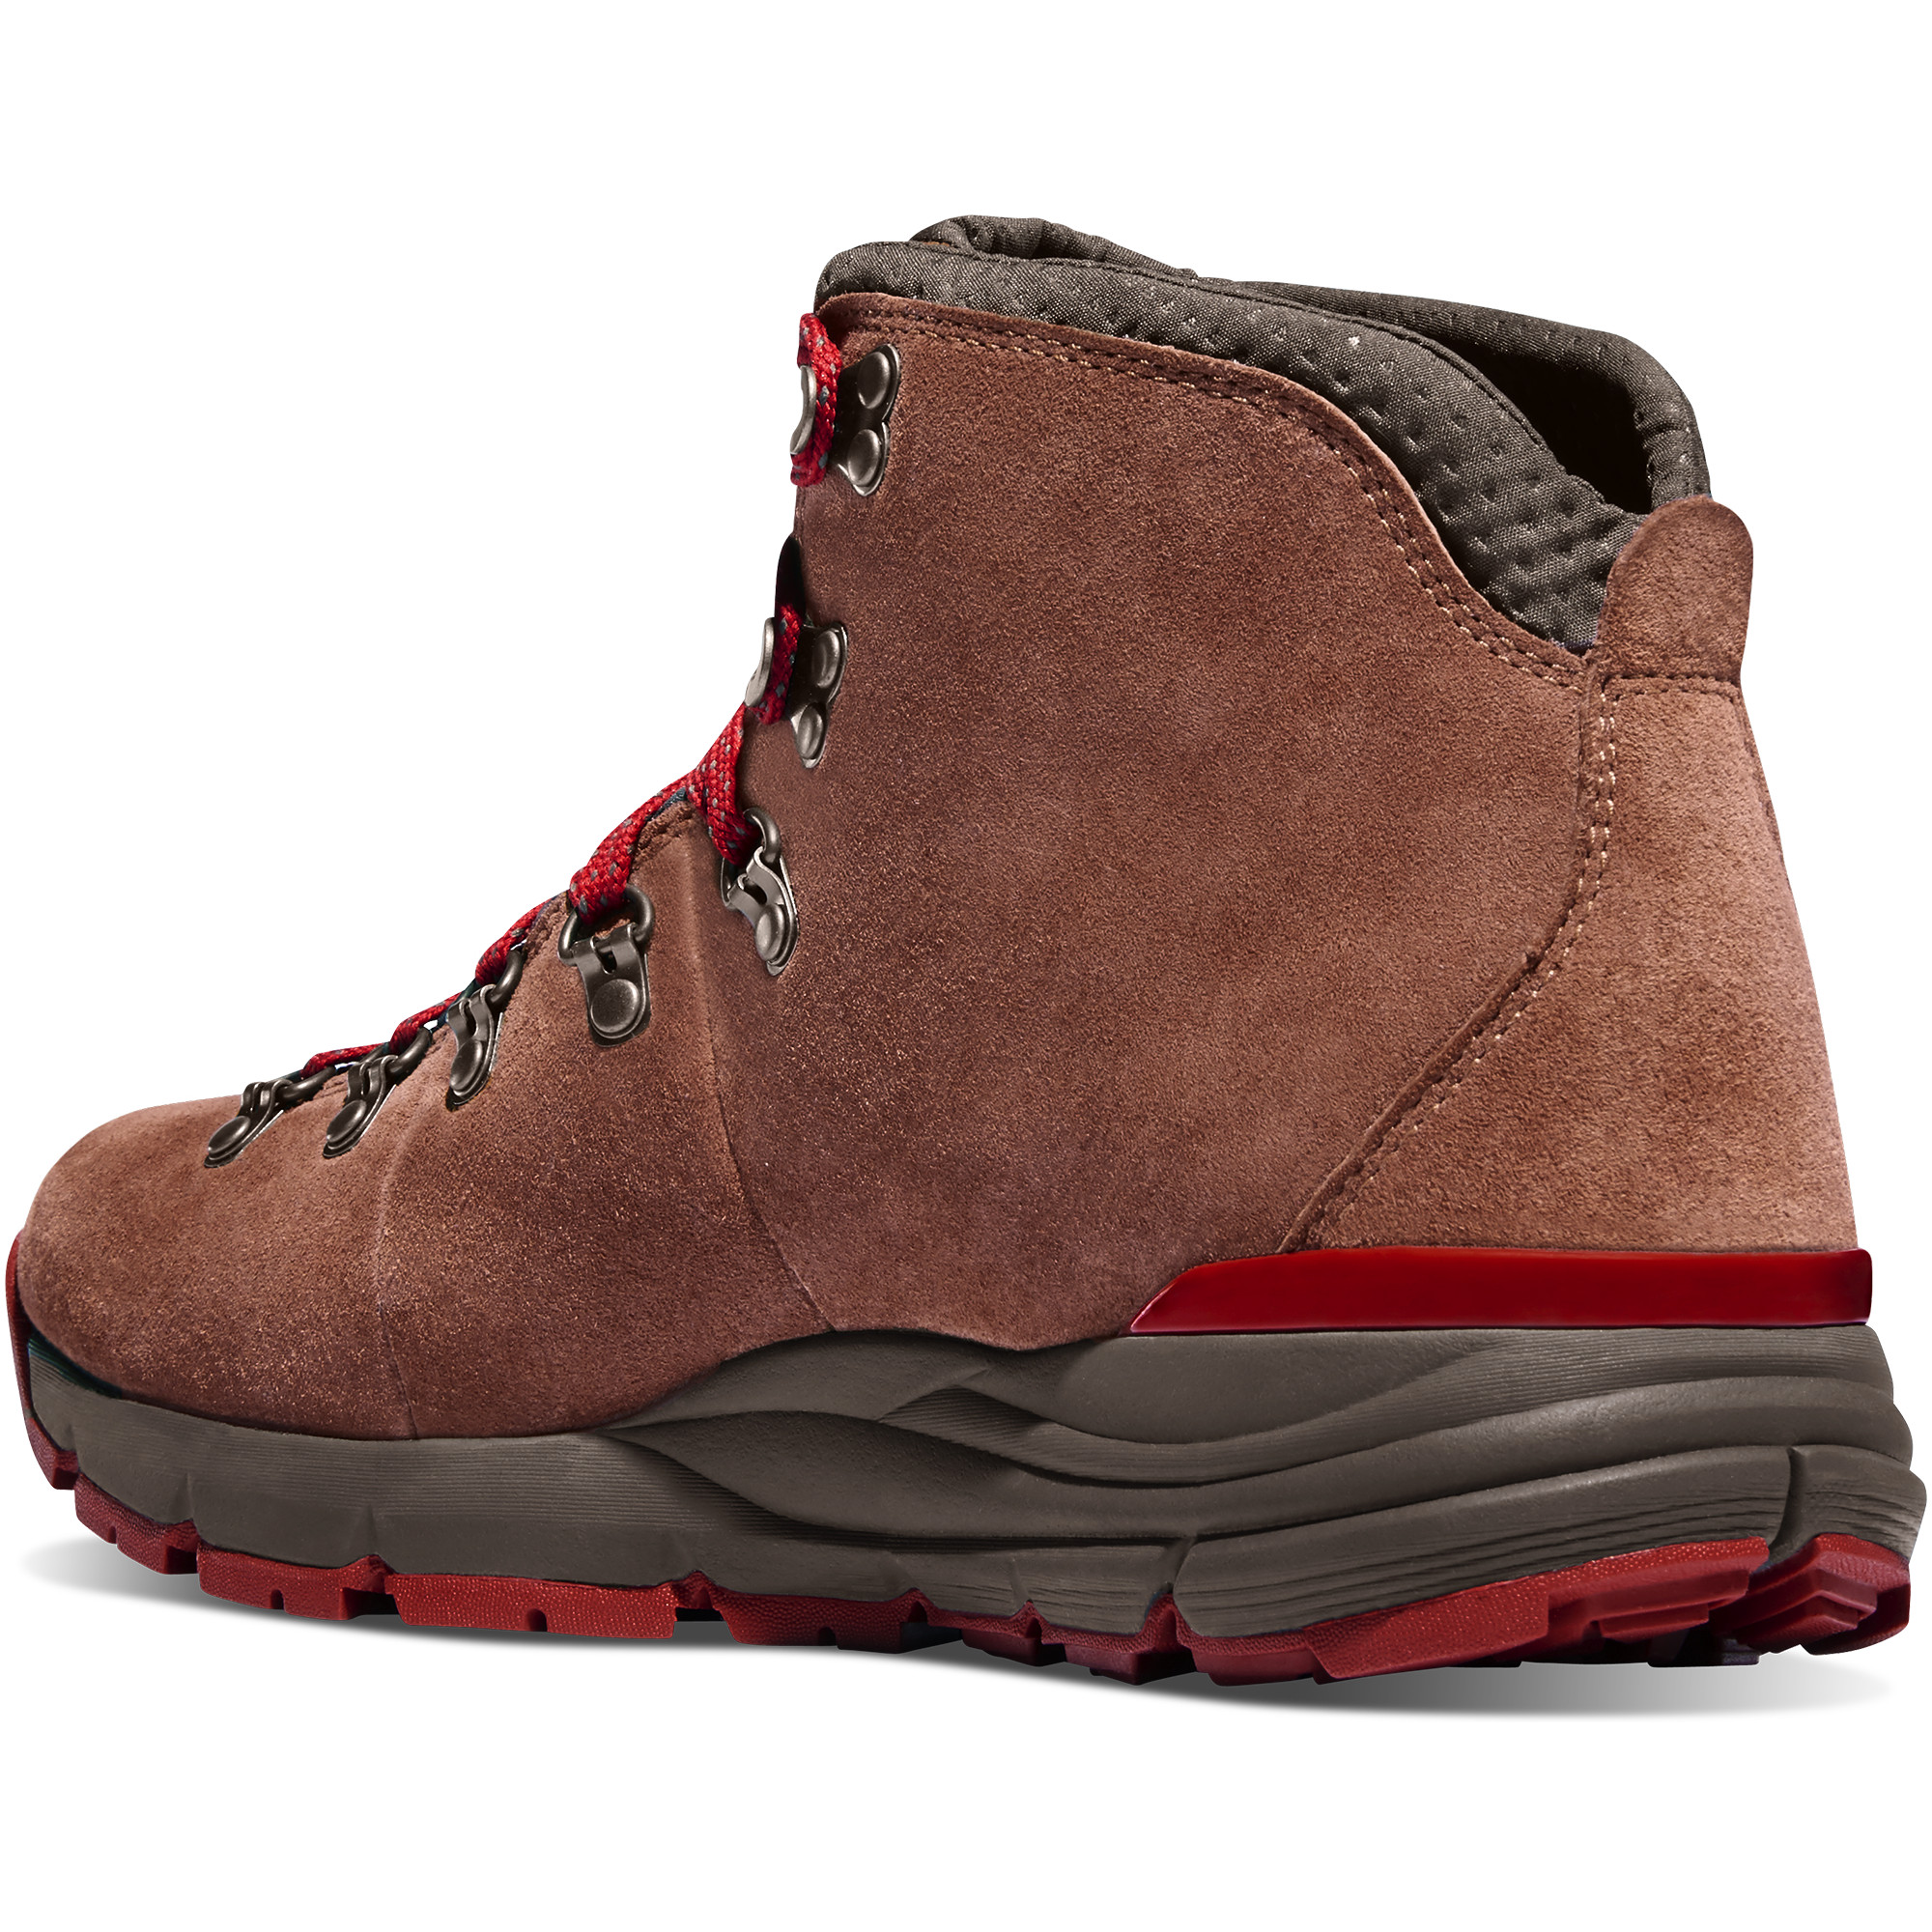 Danner Men's Mountain 600 Hiking Boots (Brown/Red) from GME Supply